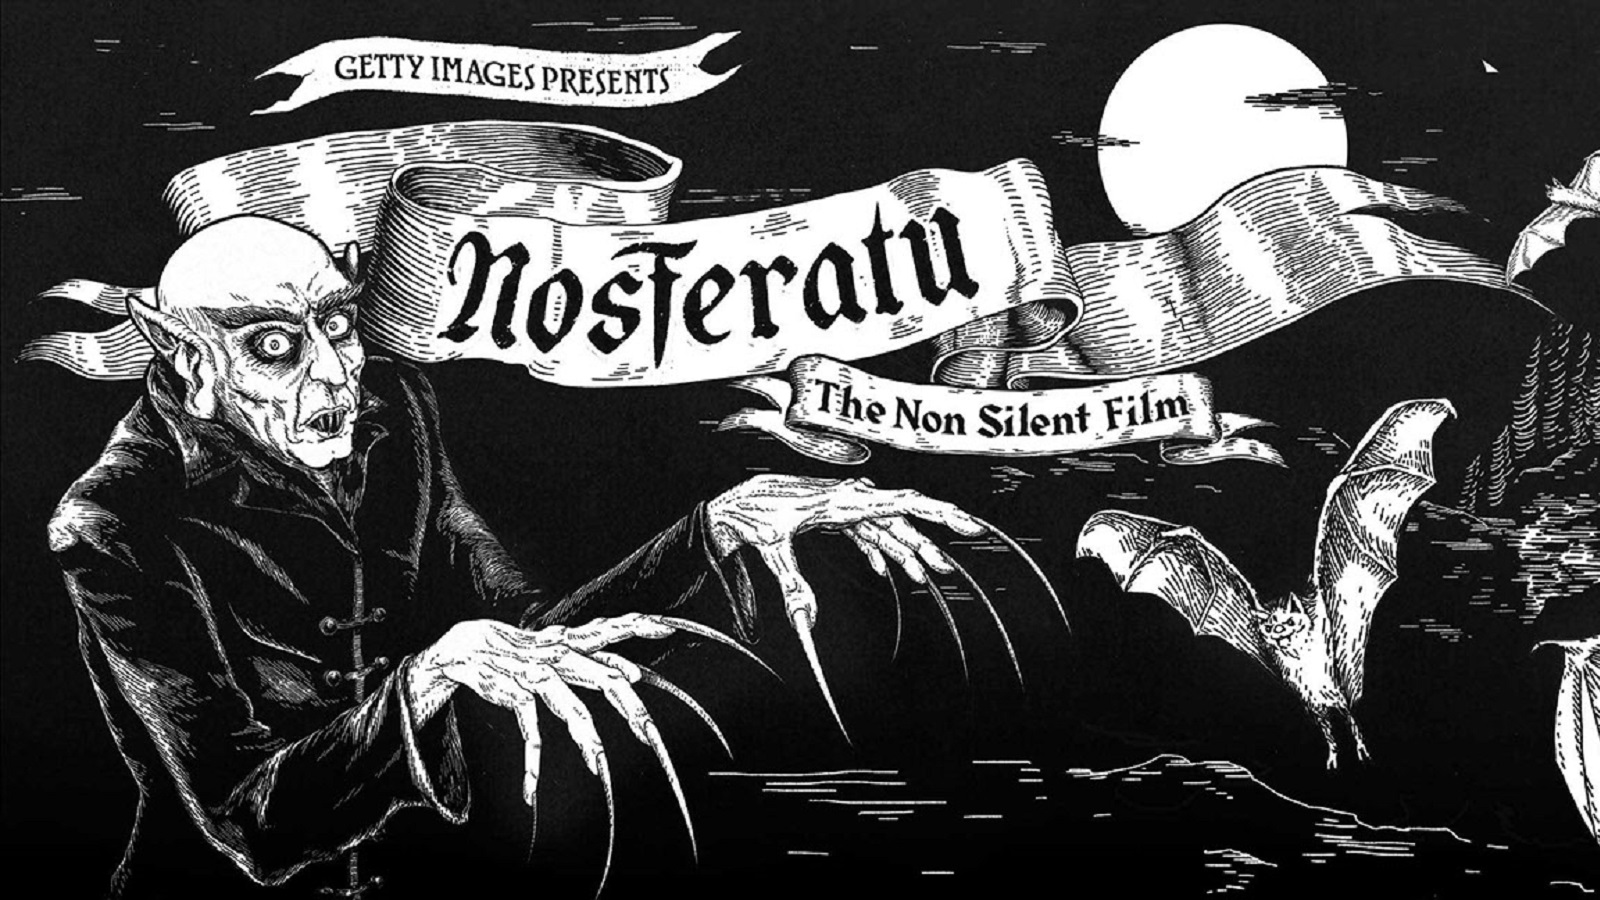 Getty Images Create Not So Silent Film Starring Count - Nosferatu , HD Wallpaper & Backgrounds